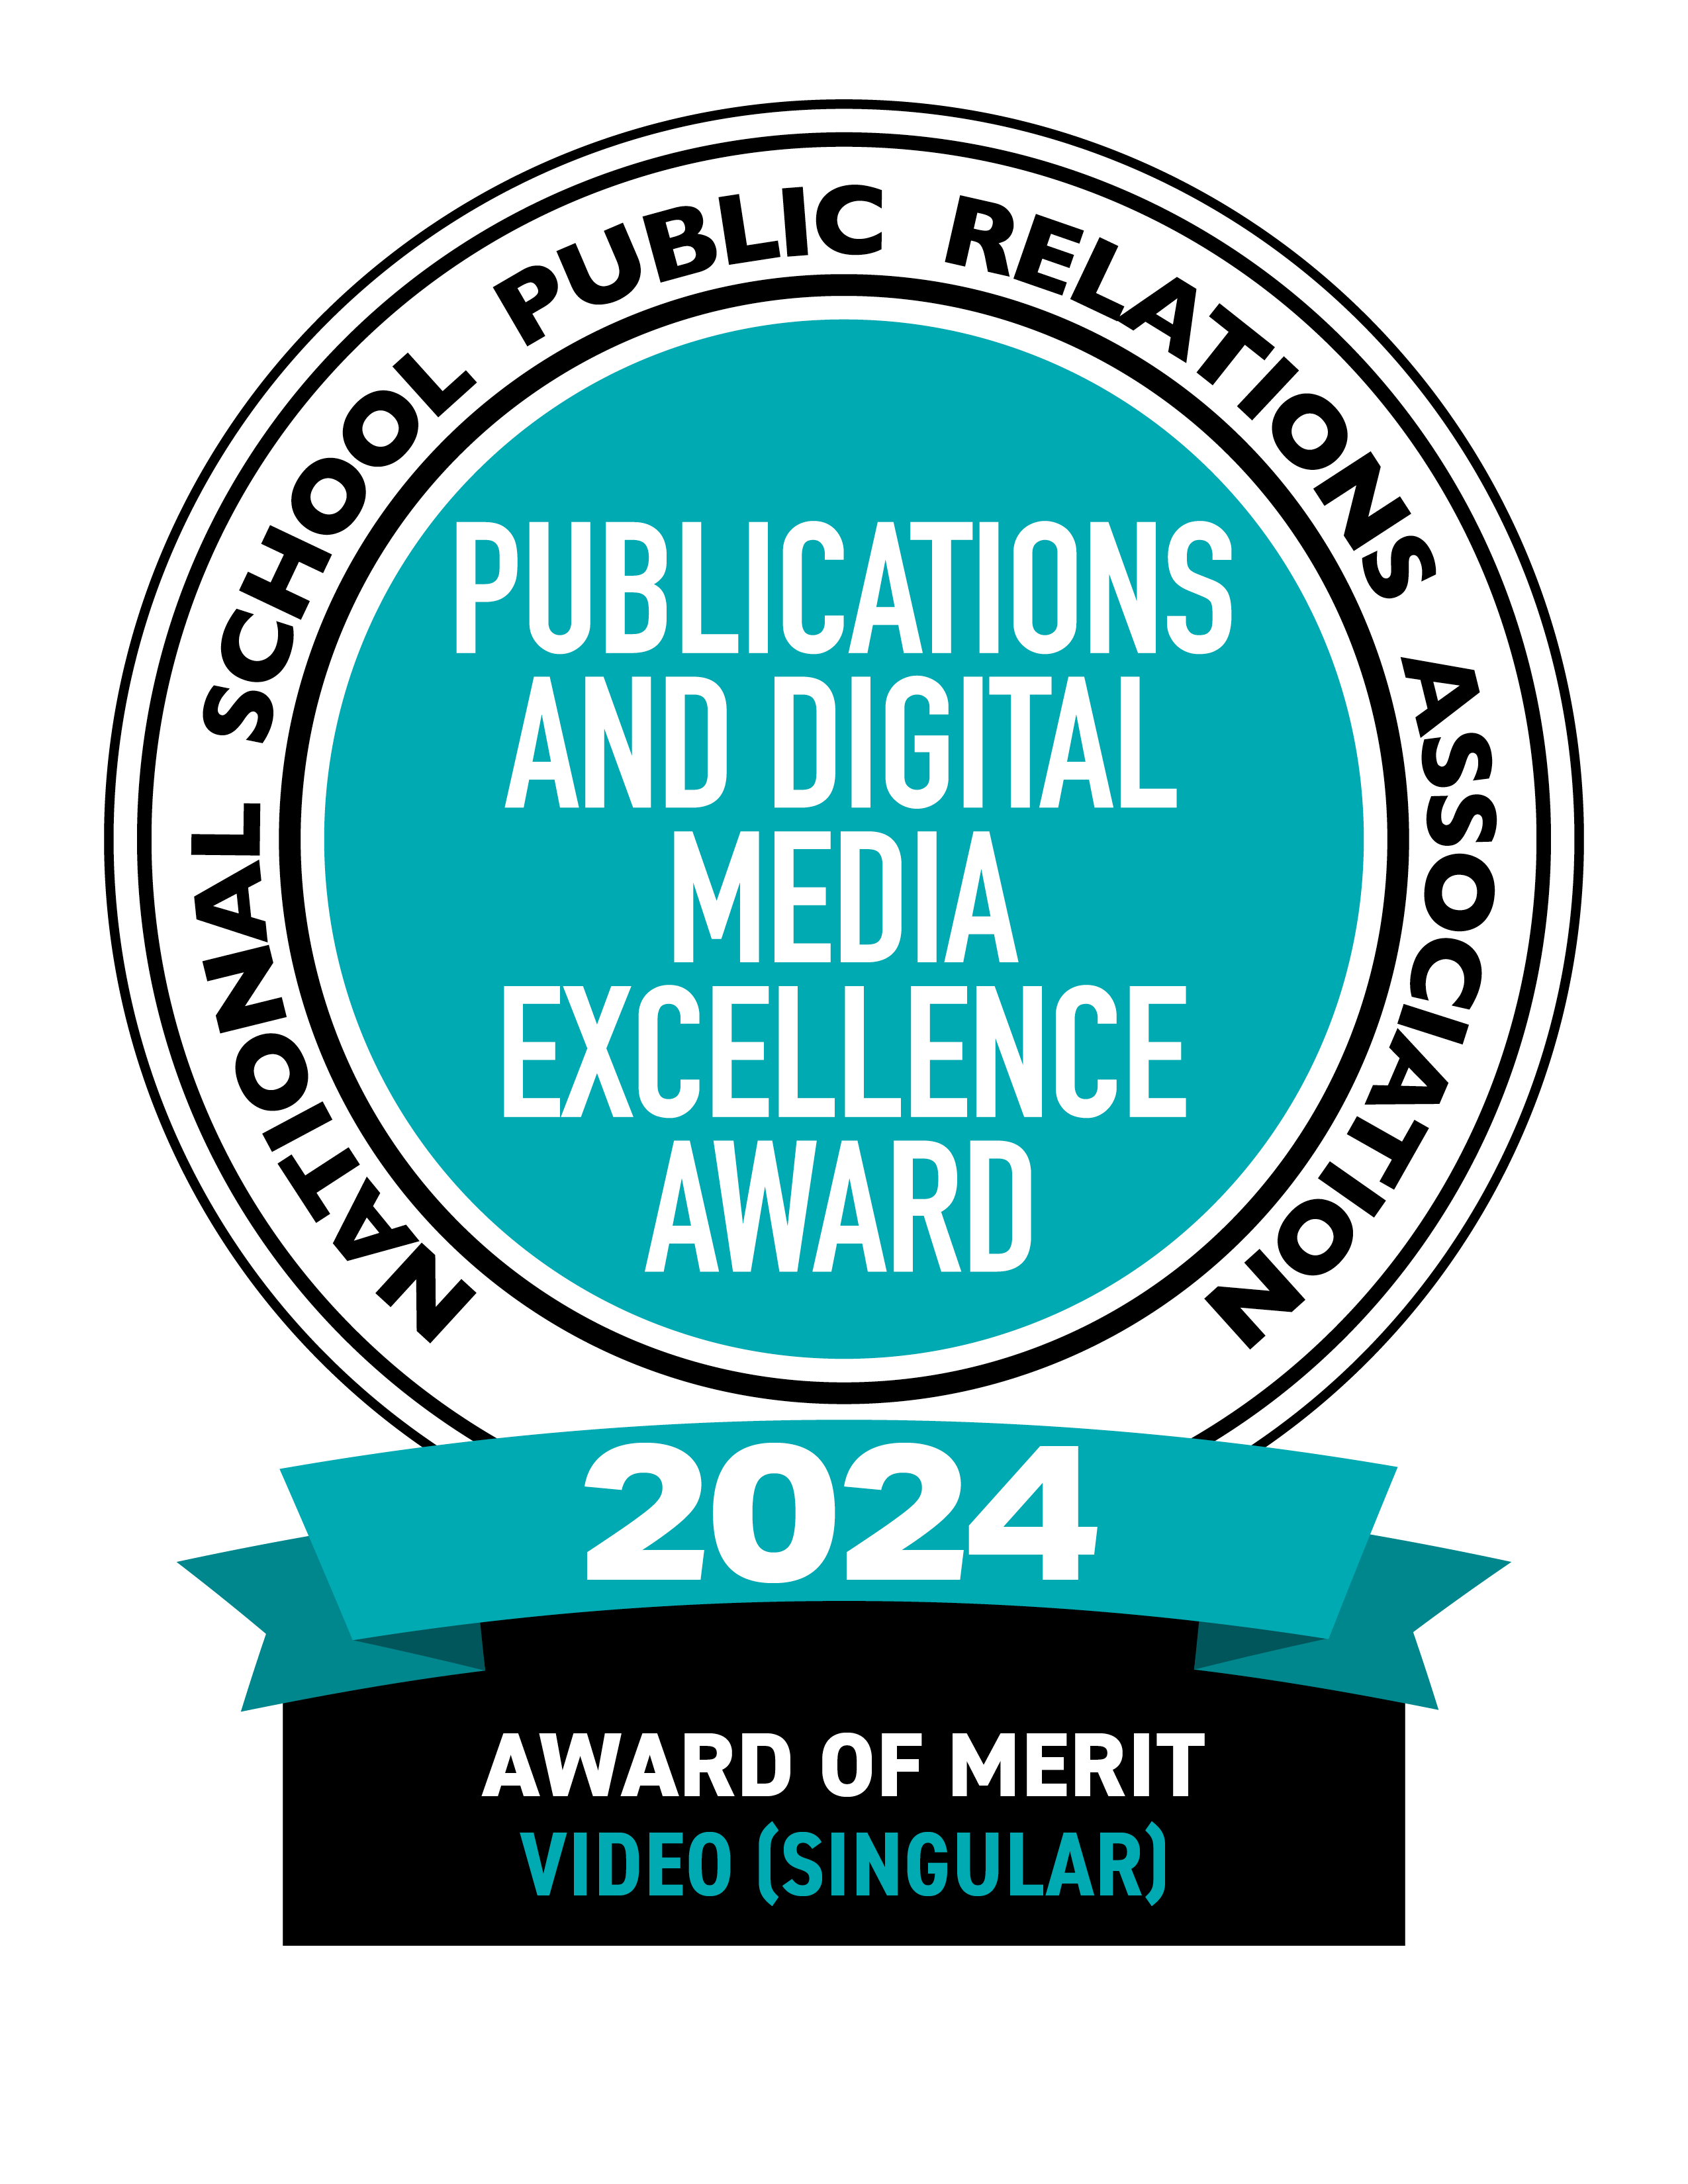 National School Public Realtions assocaition award of excellence for print newsletter